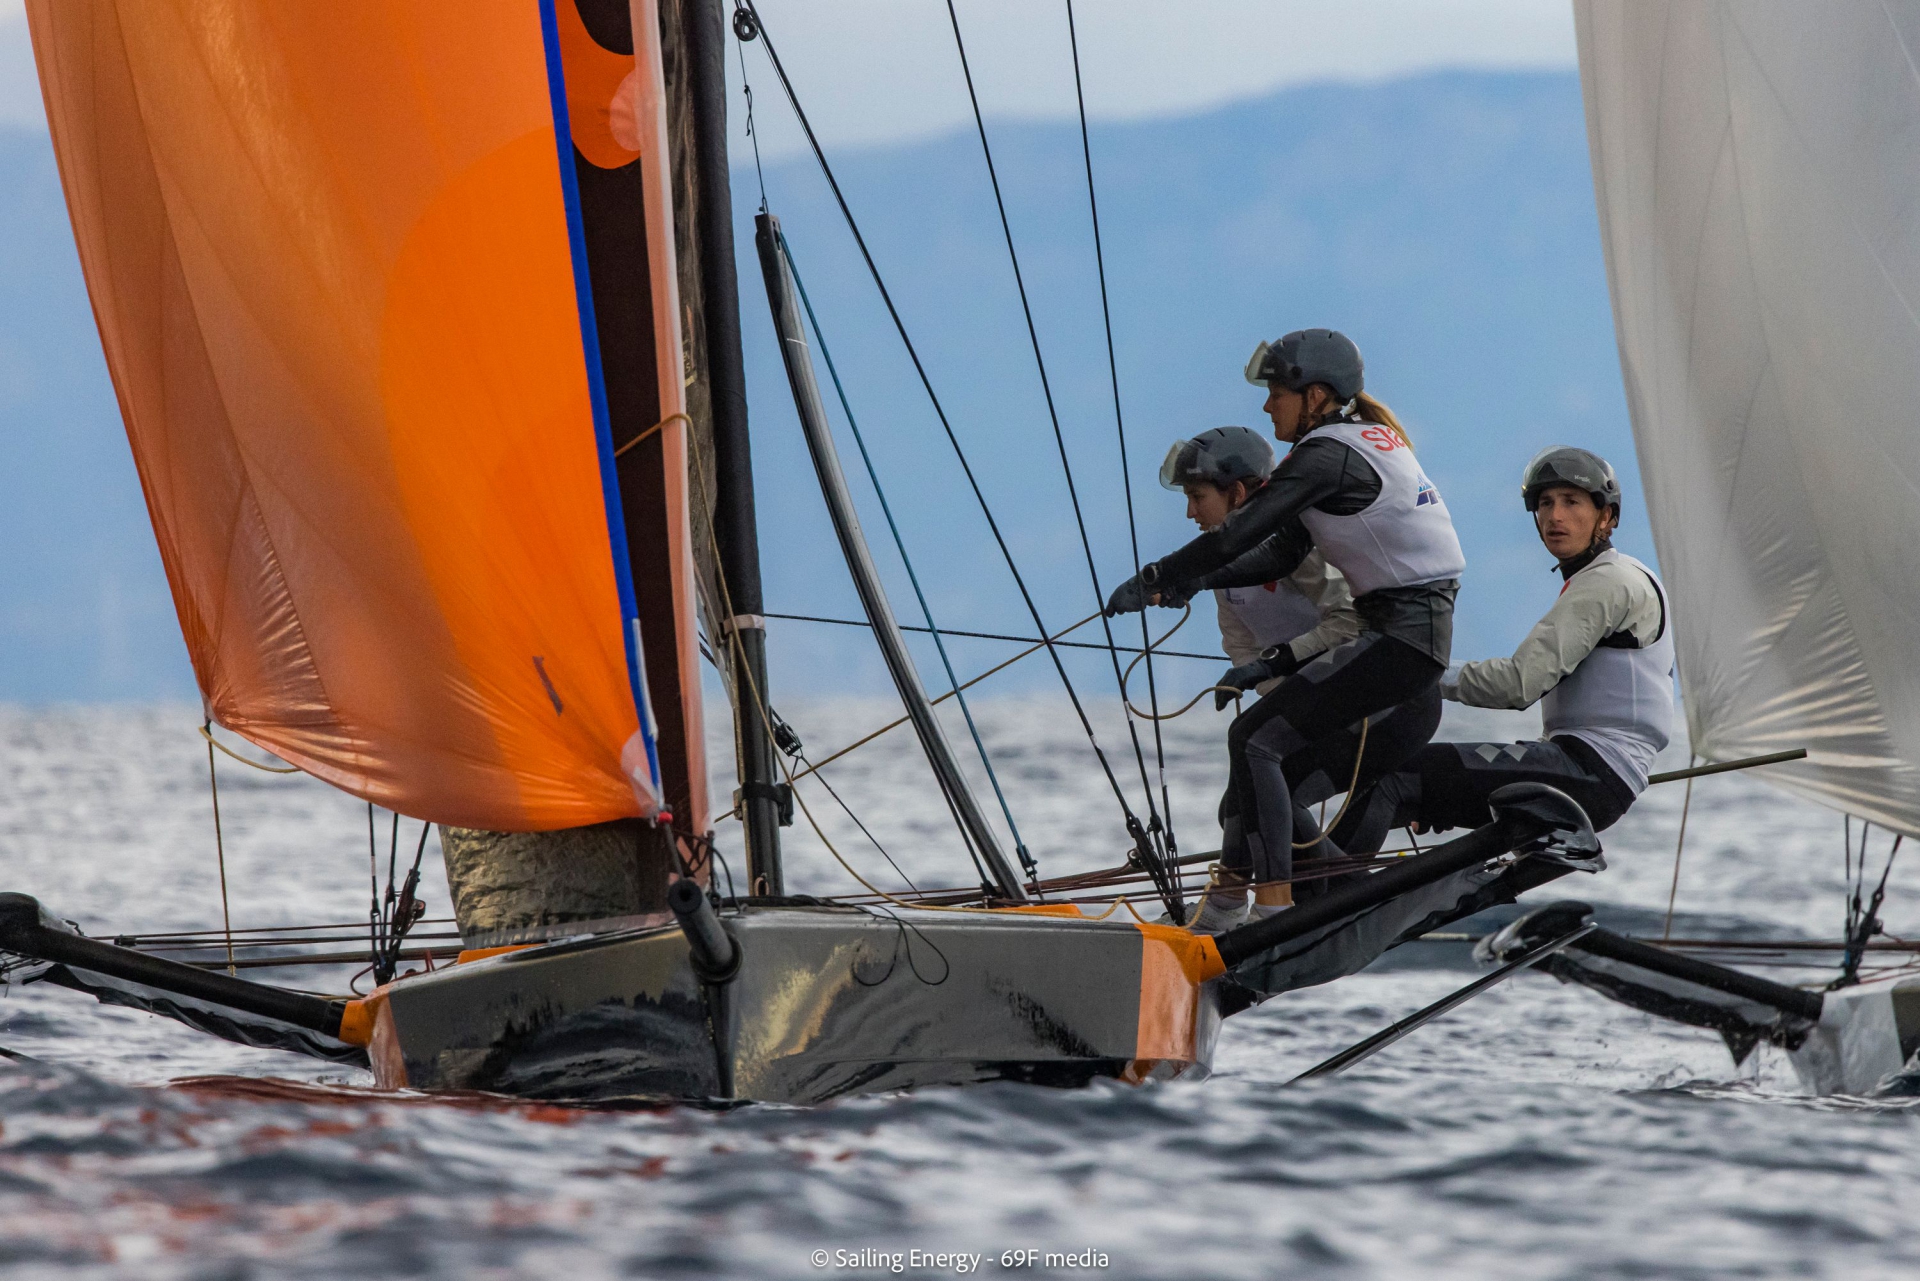 Youth Foiling Gold Cup Act 3, knock out rimandati a domani  - News - Yacht Club Costa Smeralda